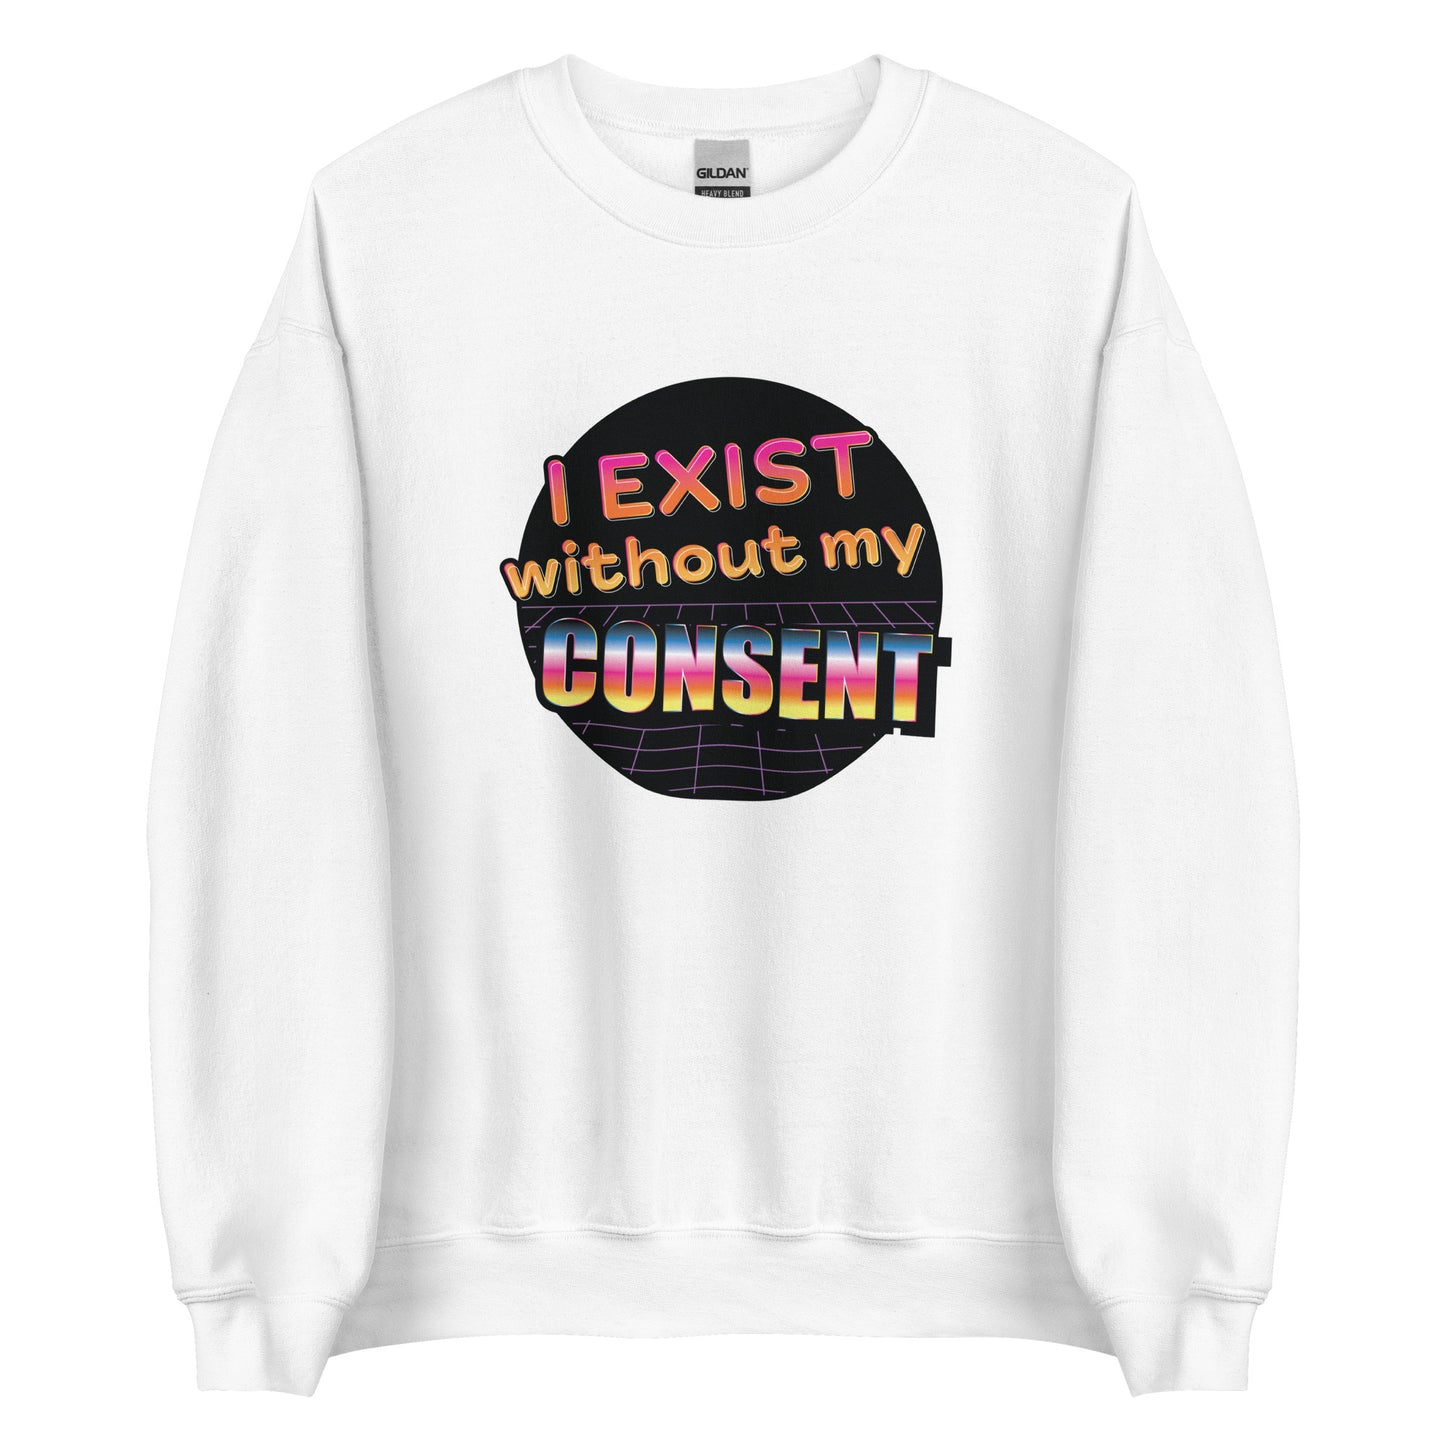 A white crewneck sweatshirt featuring a brightly colored 80's style graphic with colorful text that reads "I exist without my consent"